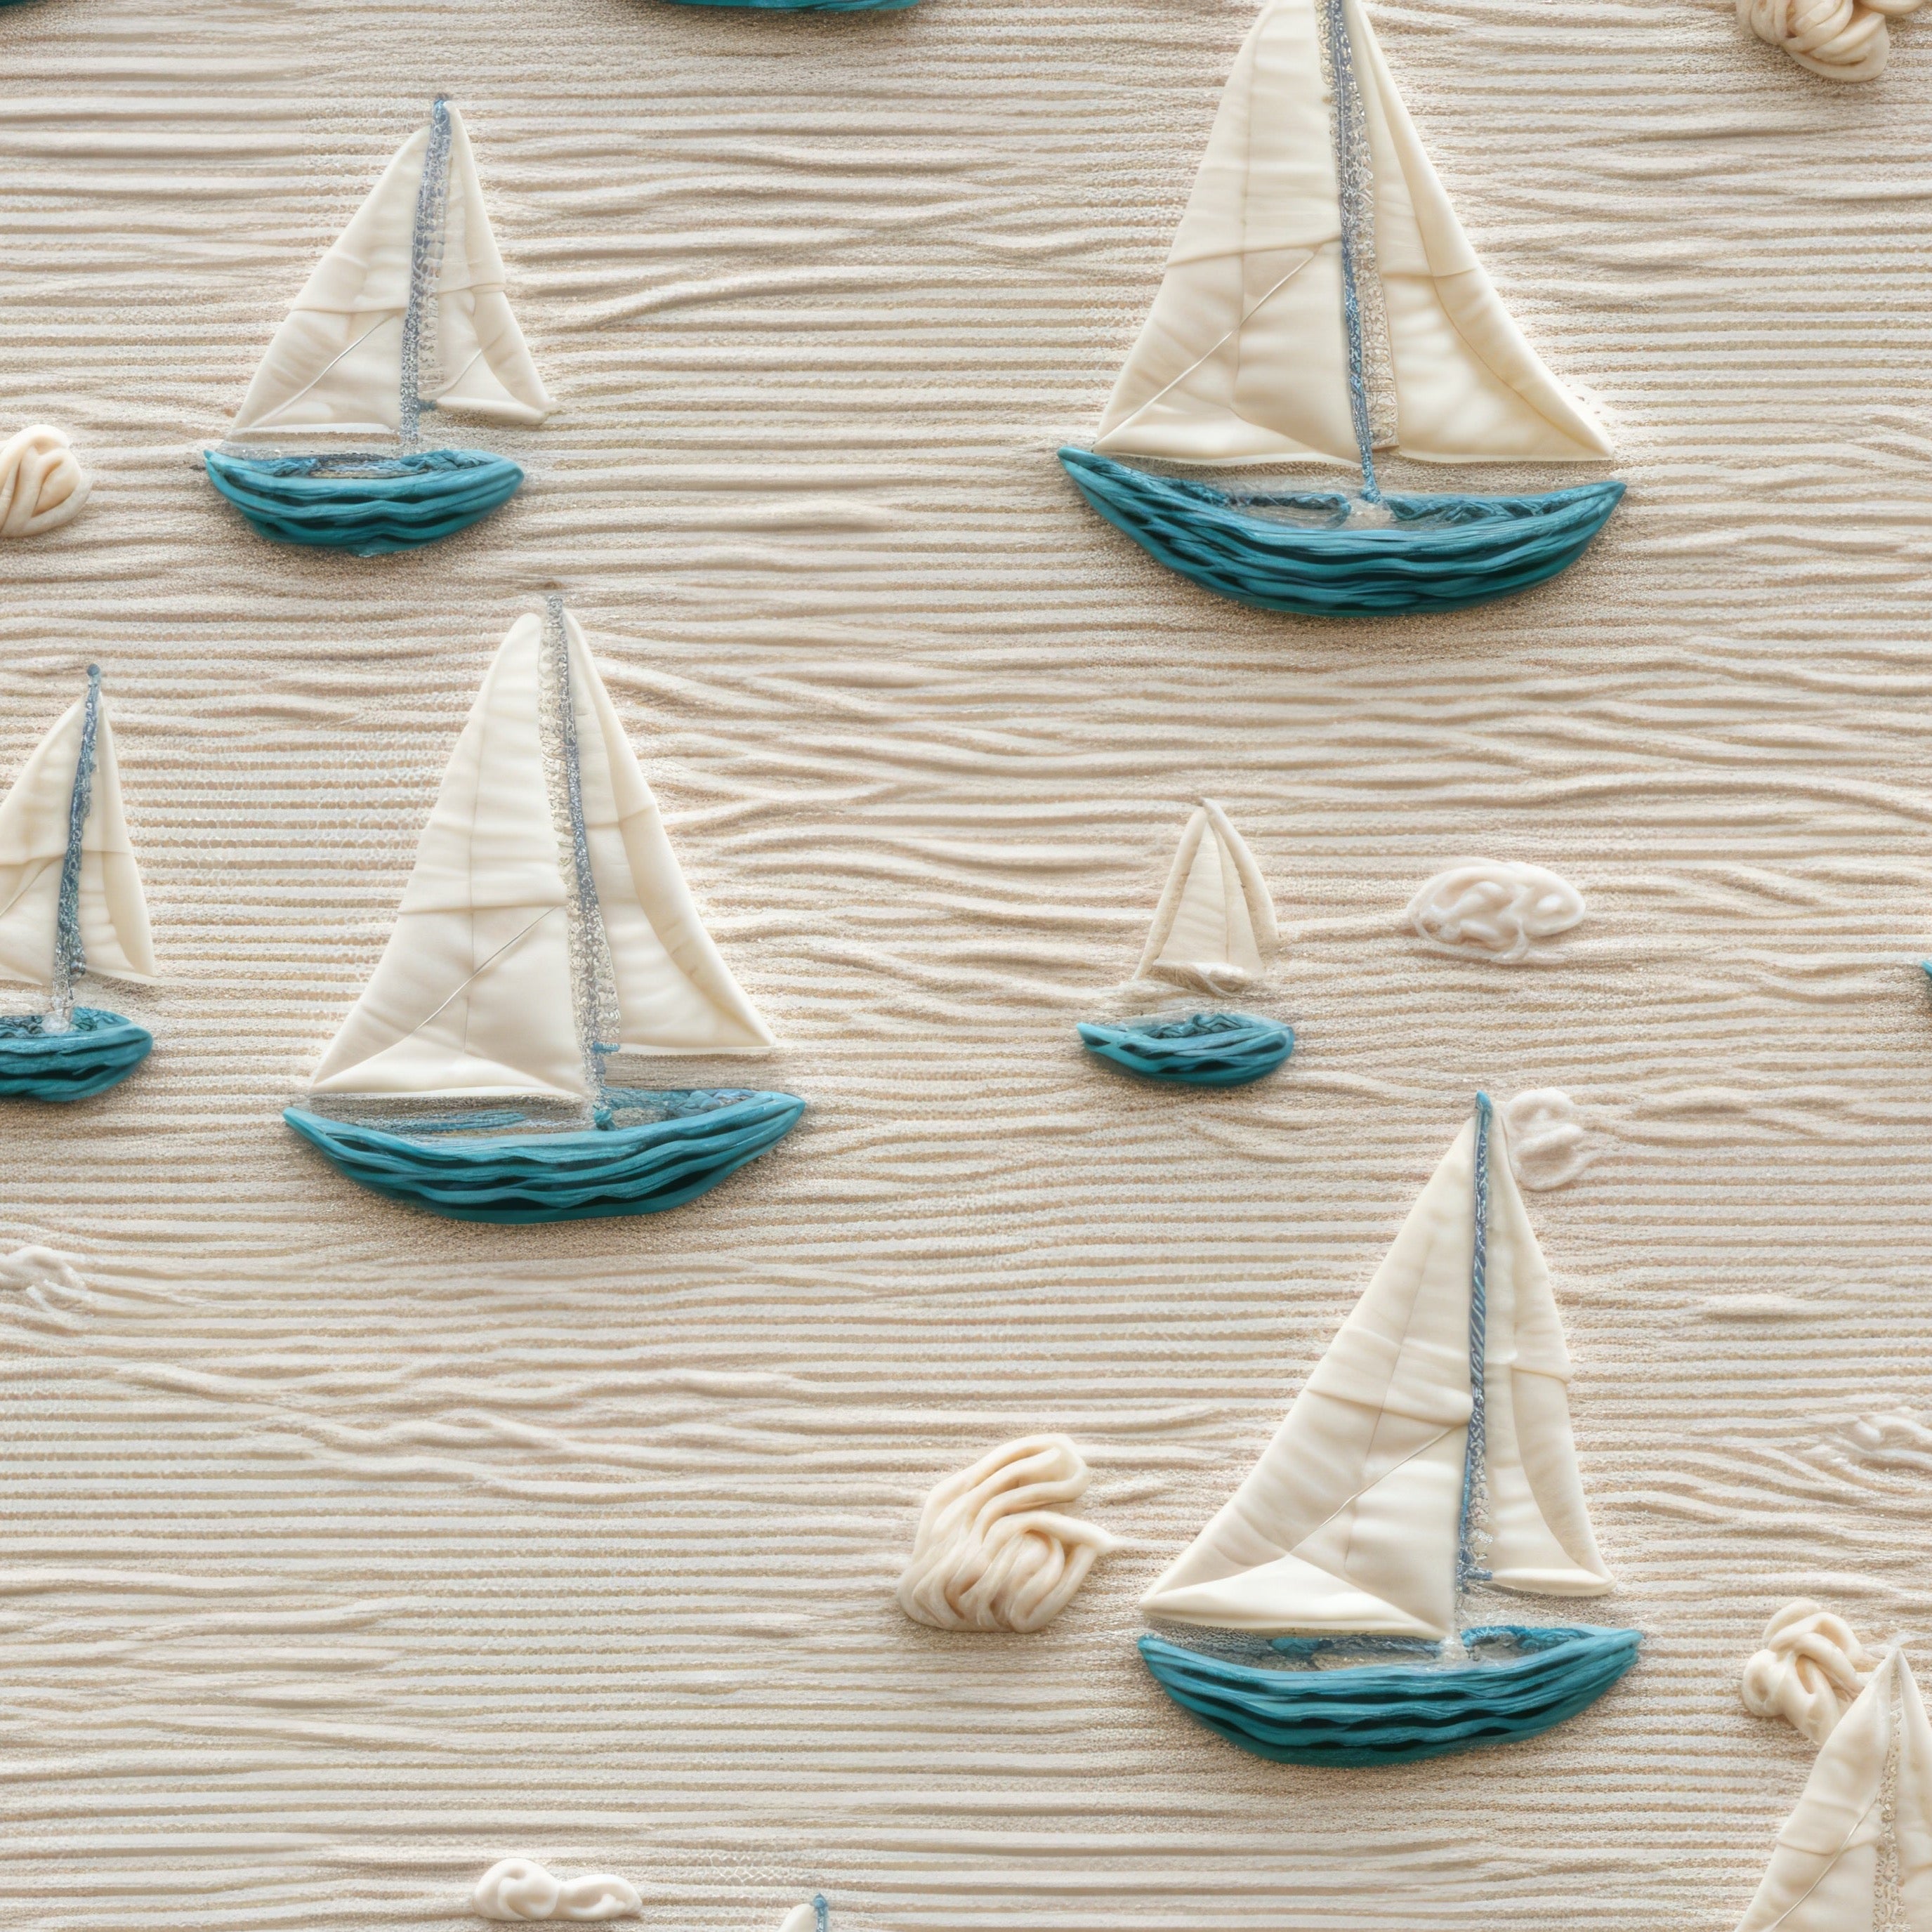 Close-up of Portside Sail Wallpaper highlighting its textured surface and detailed depictions of sailboats with white sails and teal hulls on a backdrop that resembles sandy shores, enhancing the nautical theme.